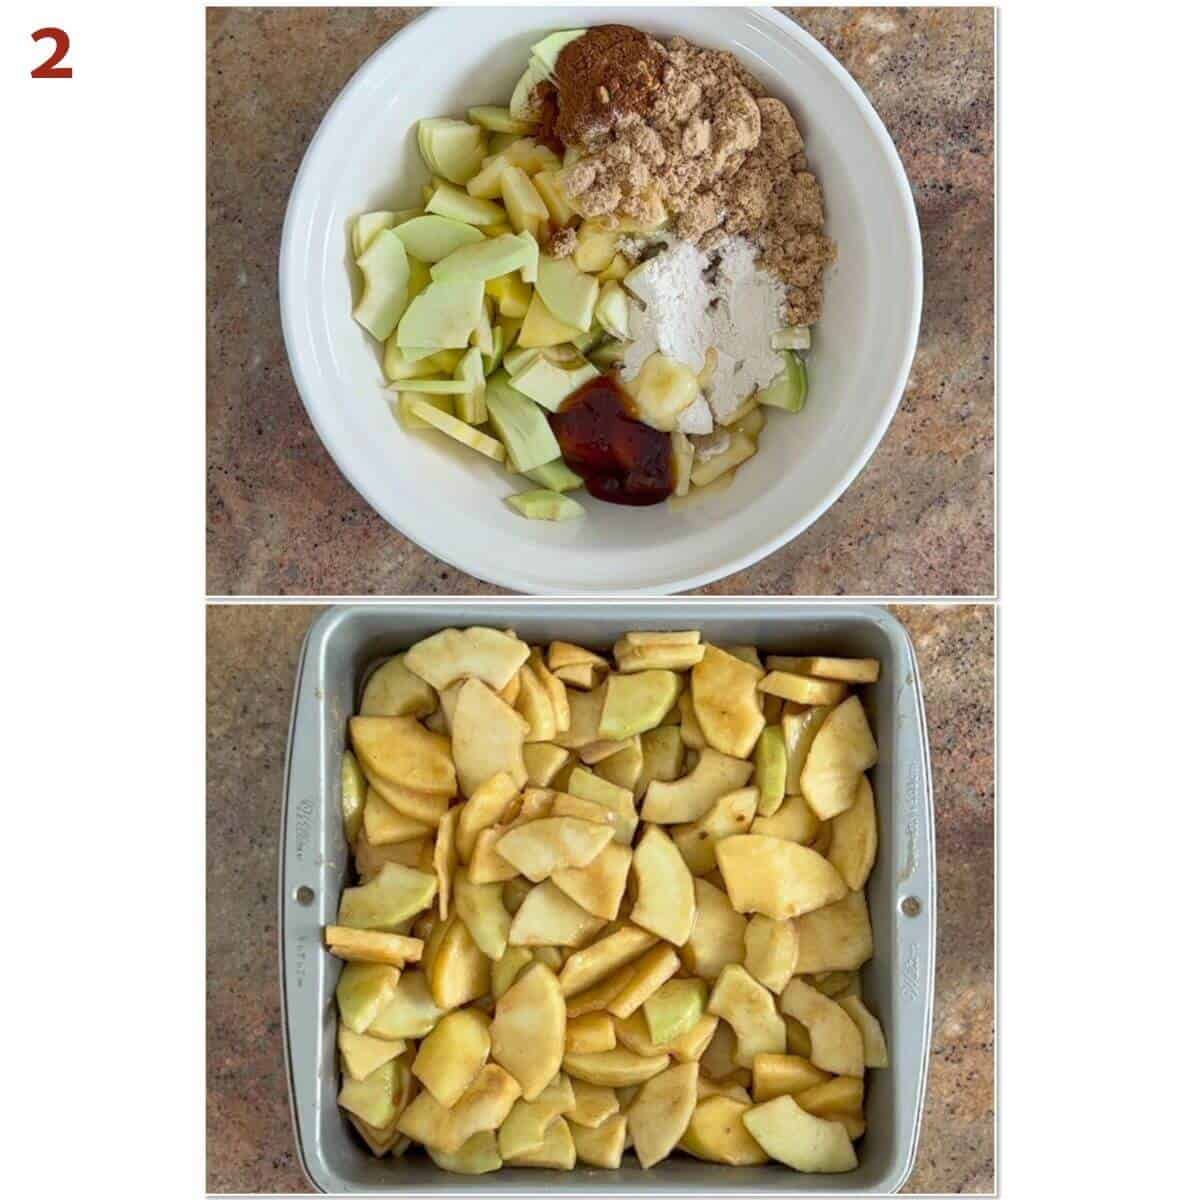 Collage of apple slices being mixed with filling ingredients & then spread in a baking pan.